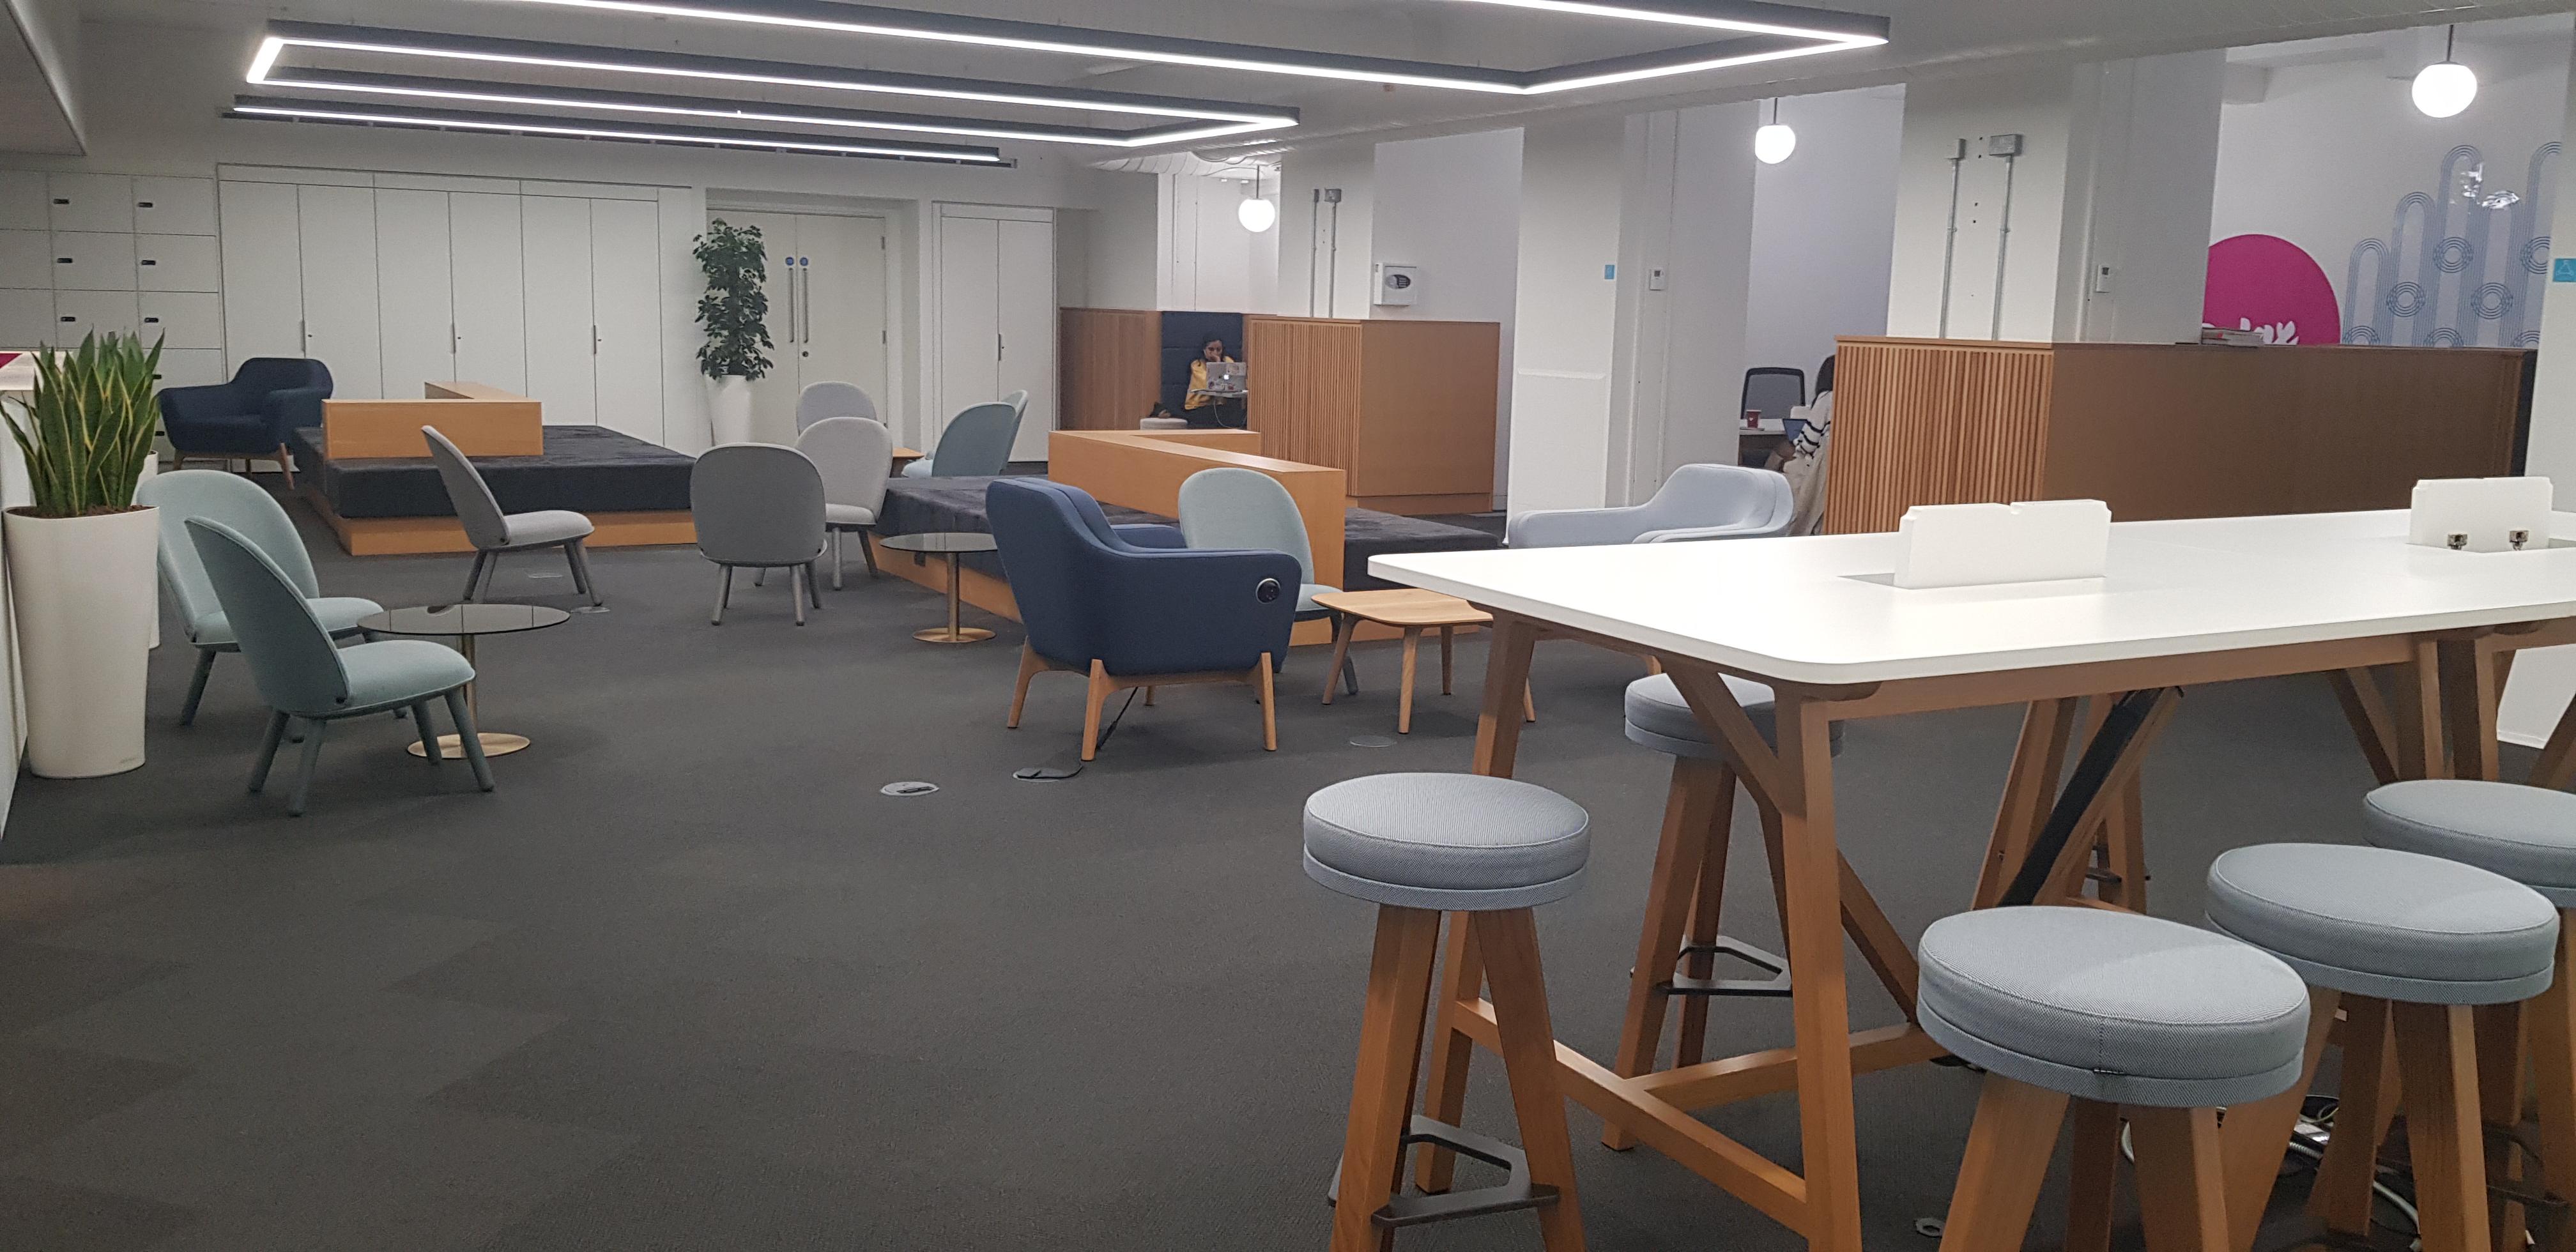 Study Space at the Senate House Library